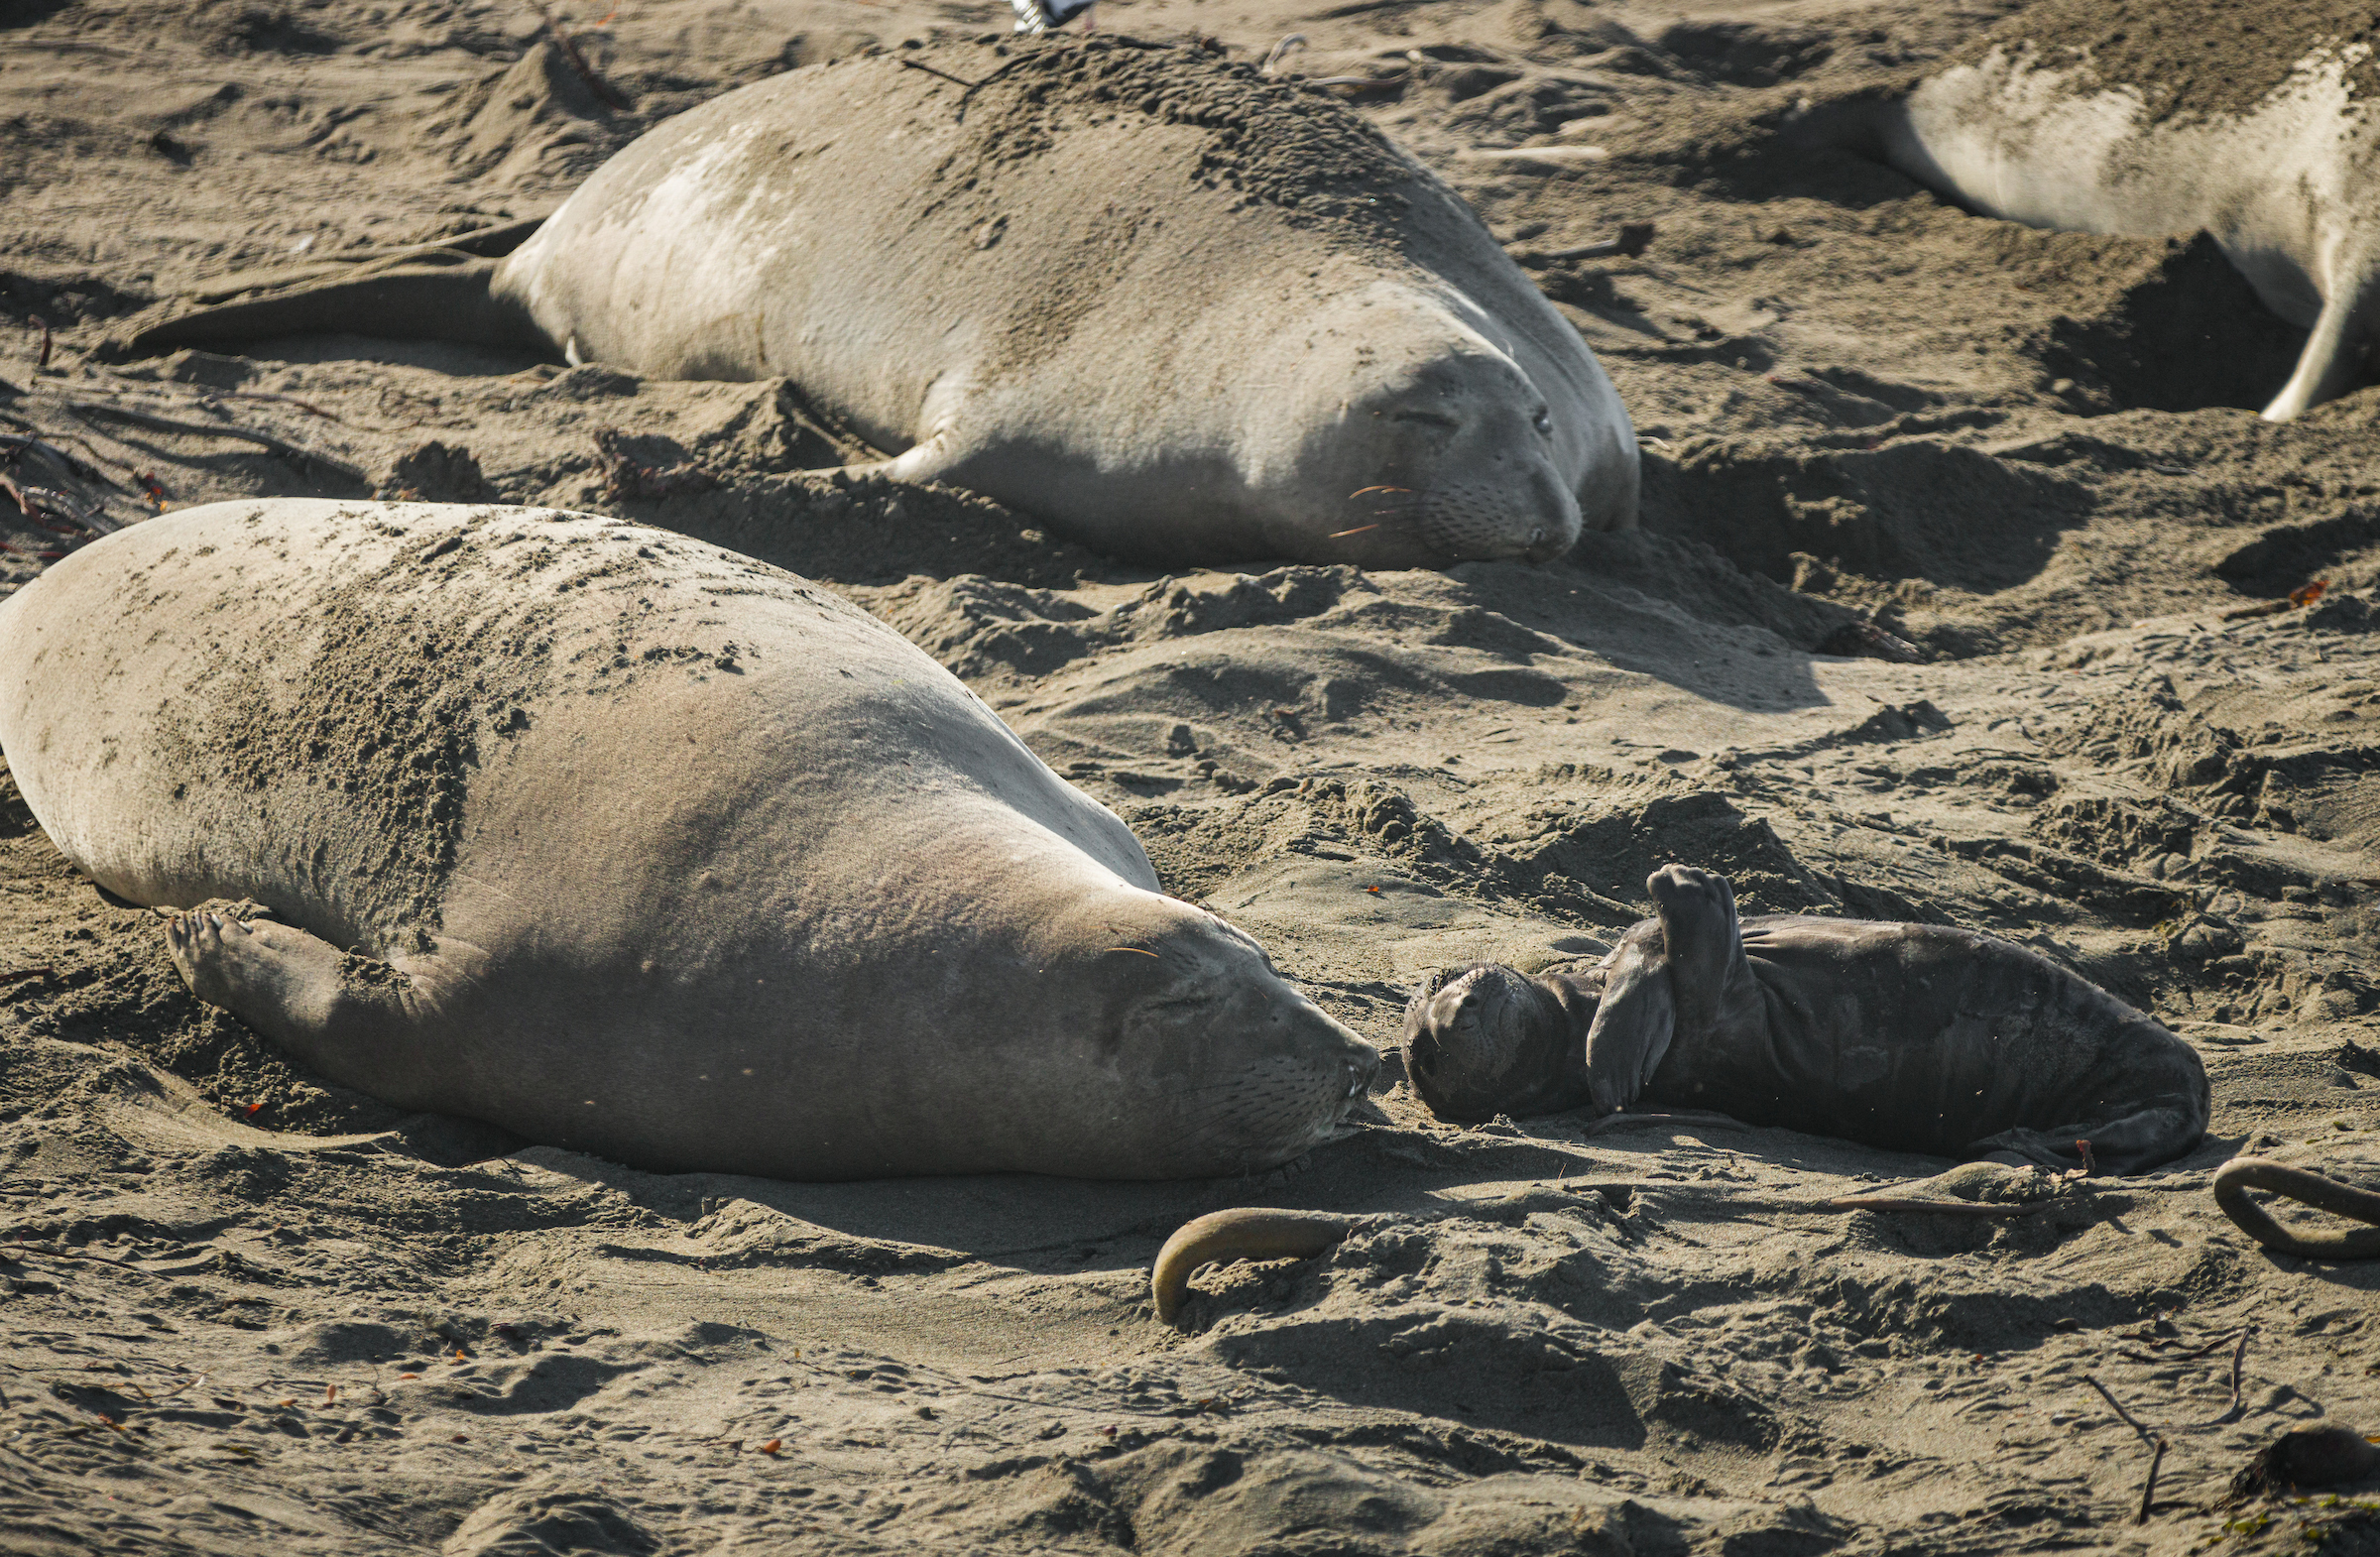 A female elephant seal lies next to a baby on the beach at the Elephant Seal Vista Point.